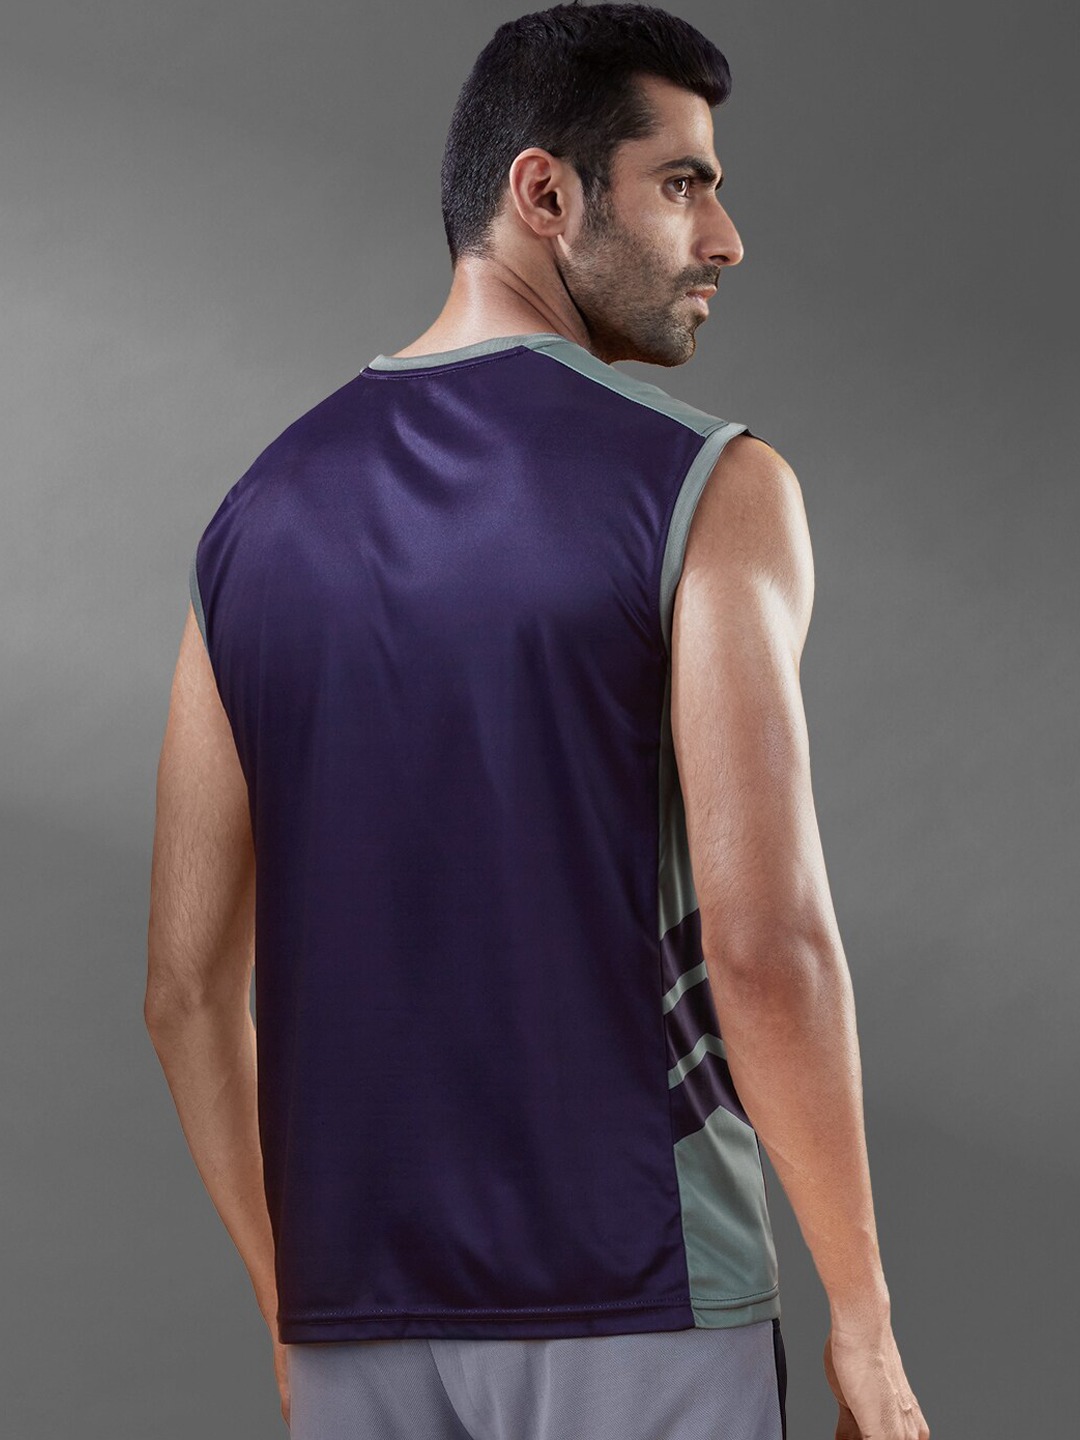 Clothing Innerwear Vests | The Souled Store Men Navy Blue & Grey Printed Cotton Gym Vest - ME30064